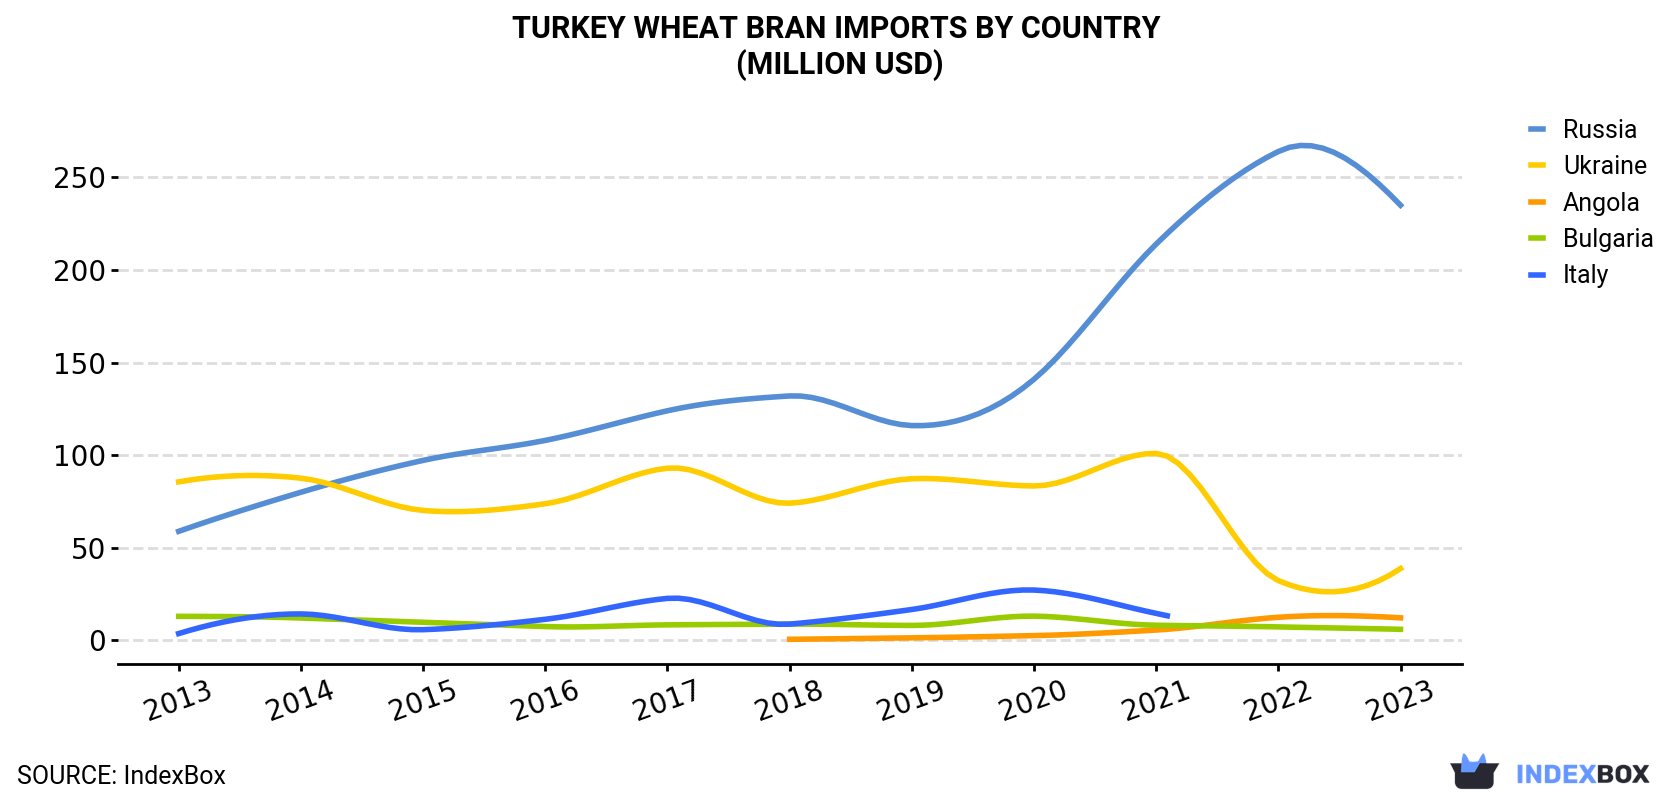 Turkey Wheat Bran Imports By Country (Million USD)